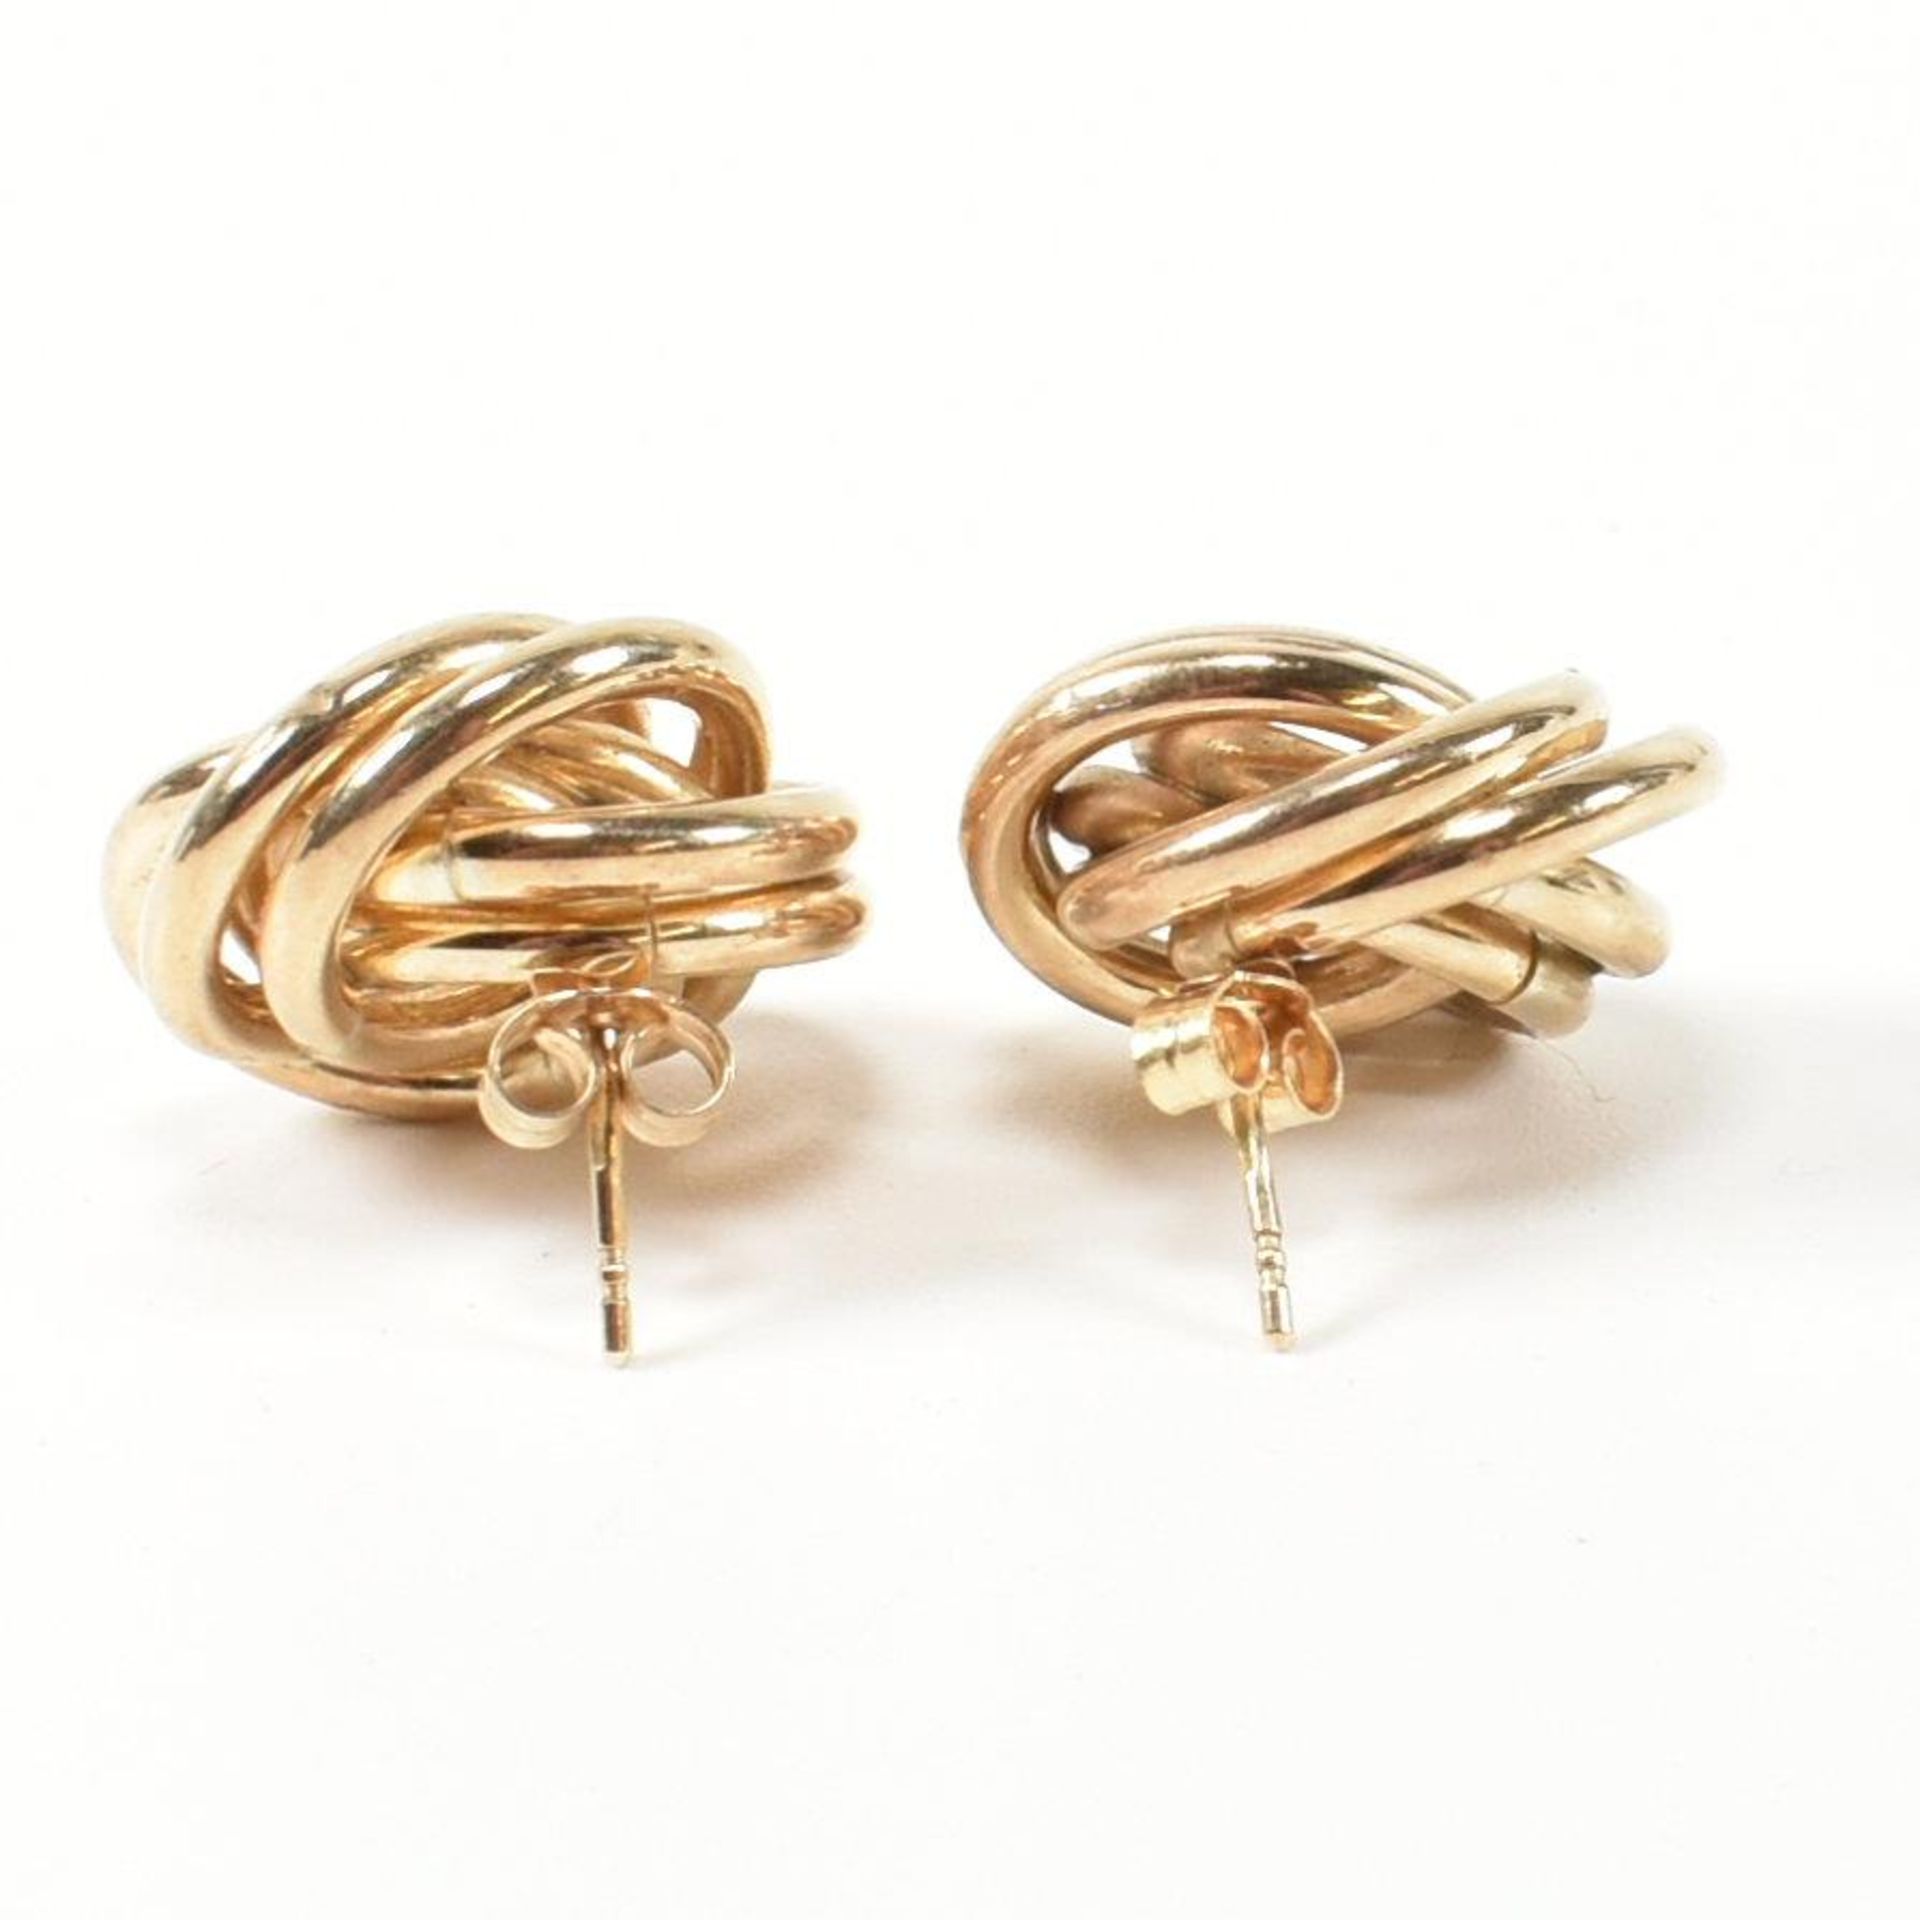 PAIR OF HALLMARKED 9CT GOLD KNOT STUD EARRINGS - Image 3 of 6